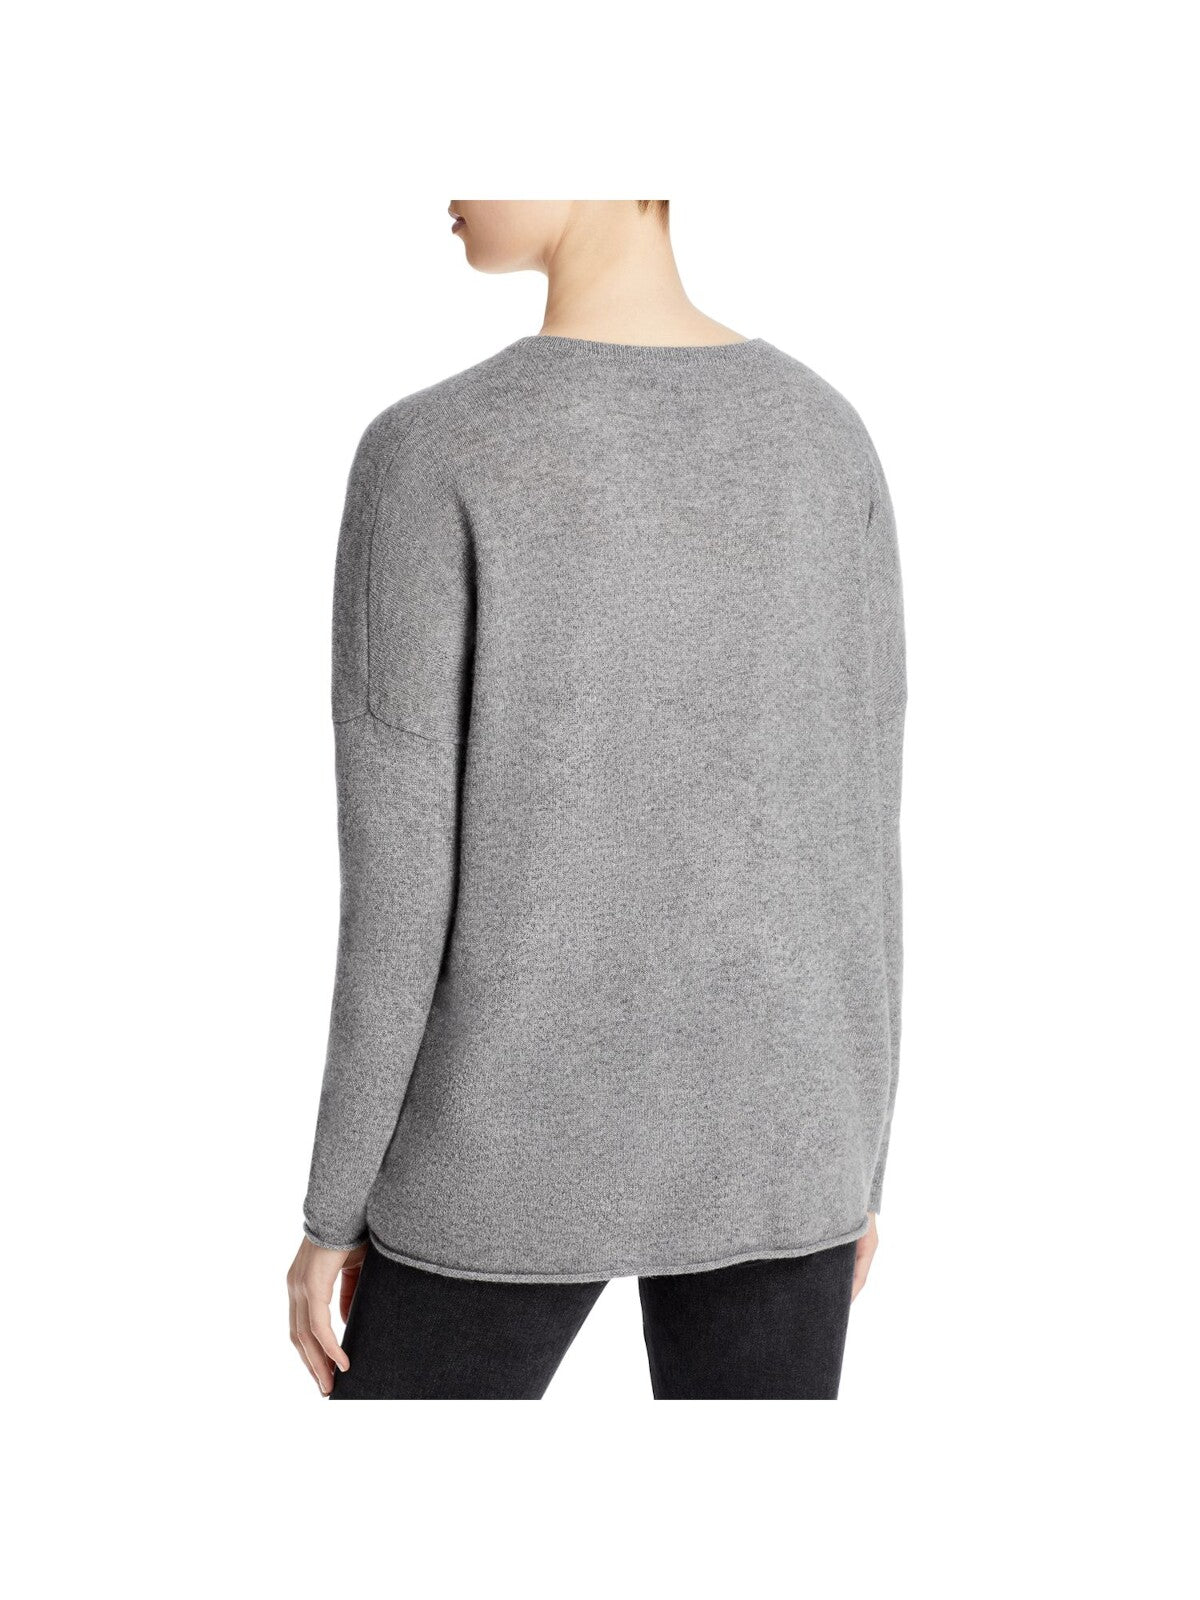 Designer Brand Womens Gray Cashmere Ribbed Pull Over Style Heather Long Sleeve V Neck Wear To Work Top M